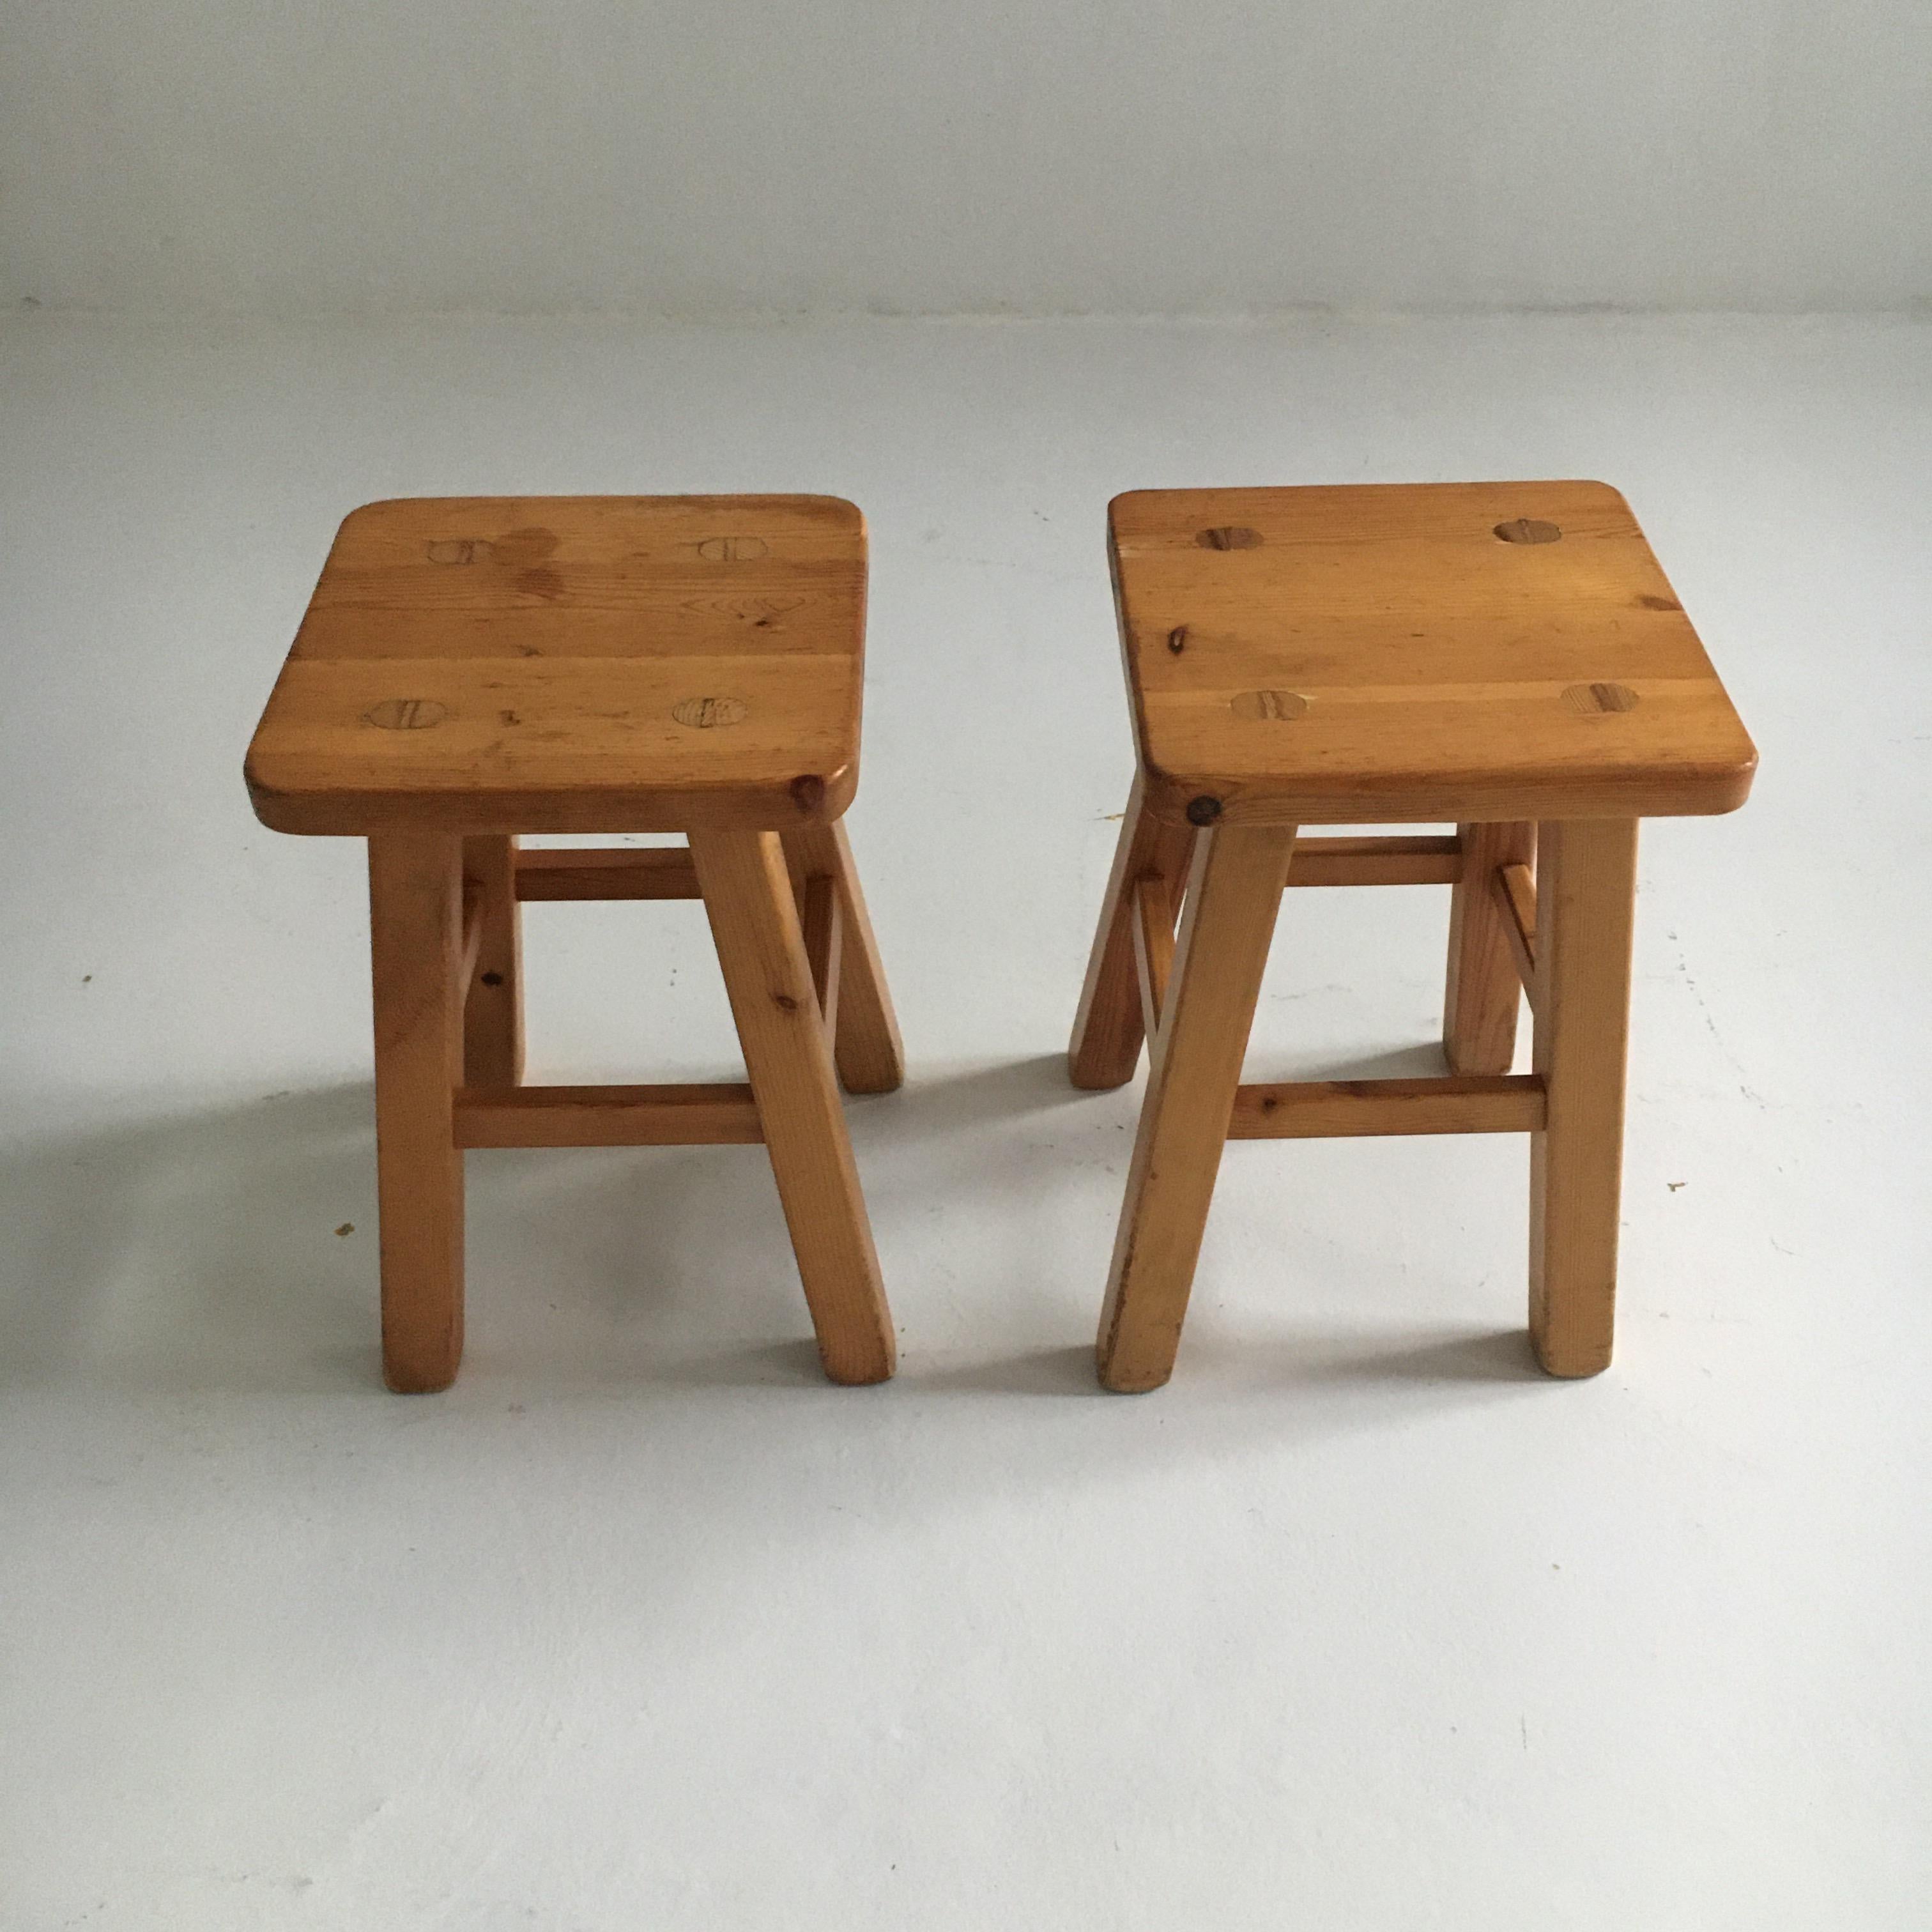 Charlotte Perriand pair of square pine stools, France, 1960s.